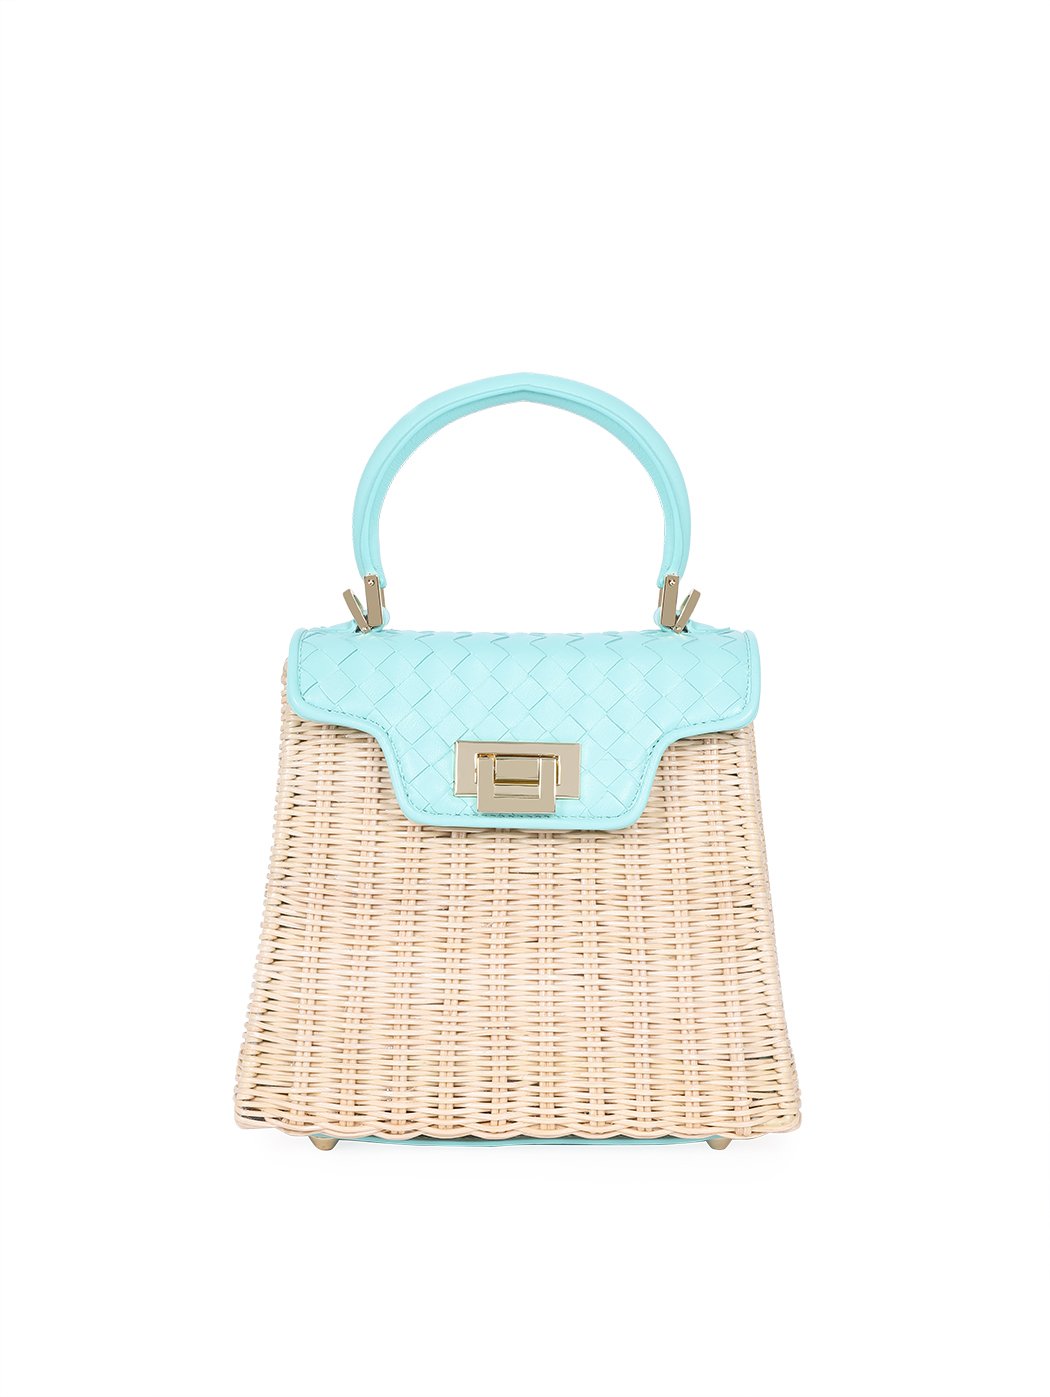 Wicker and Leather Woven Top Handle Box Bag Aqua Blue